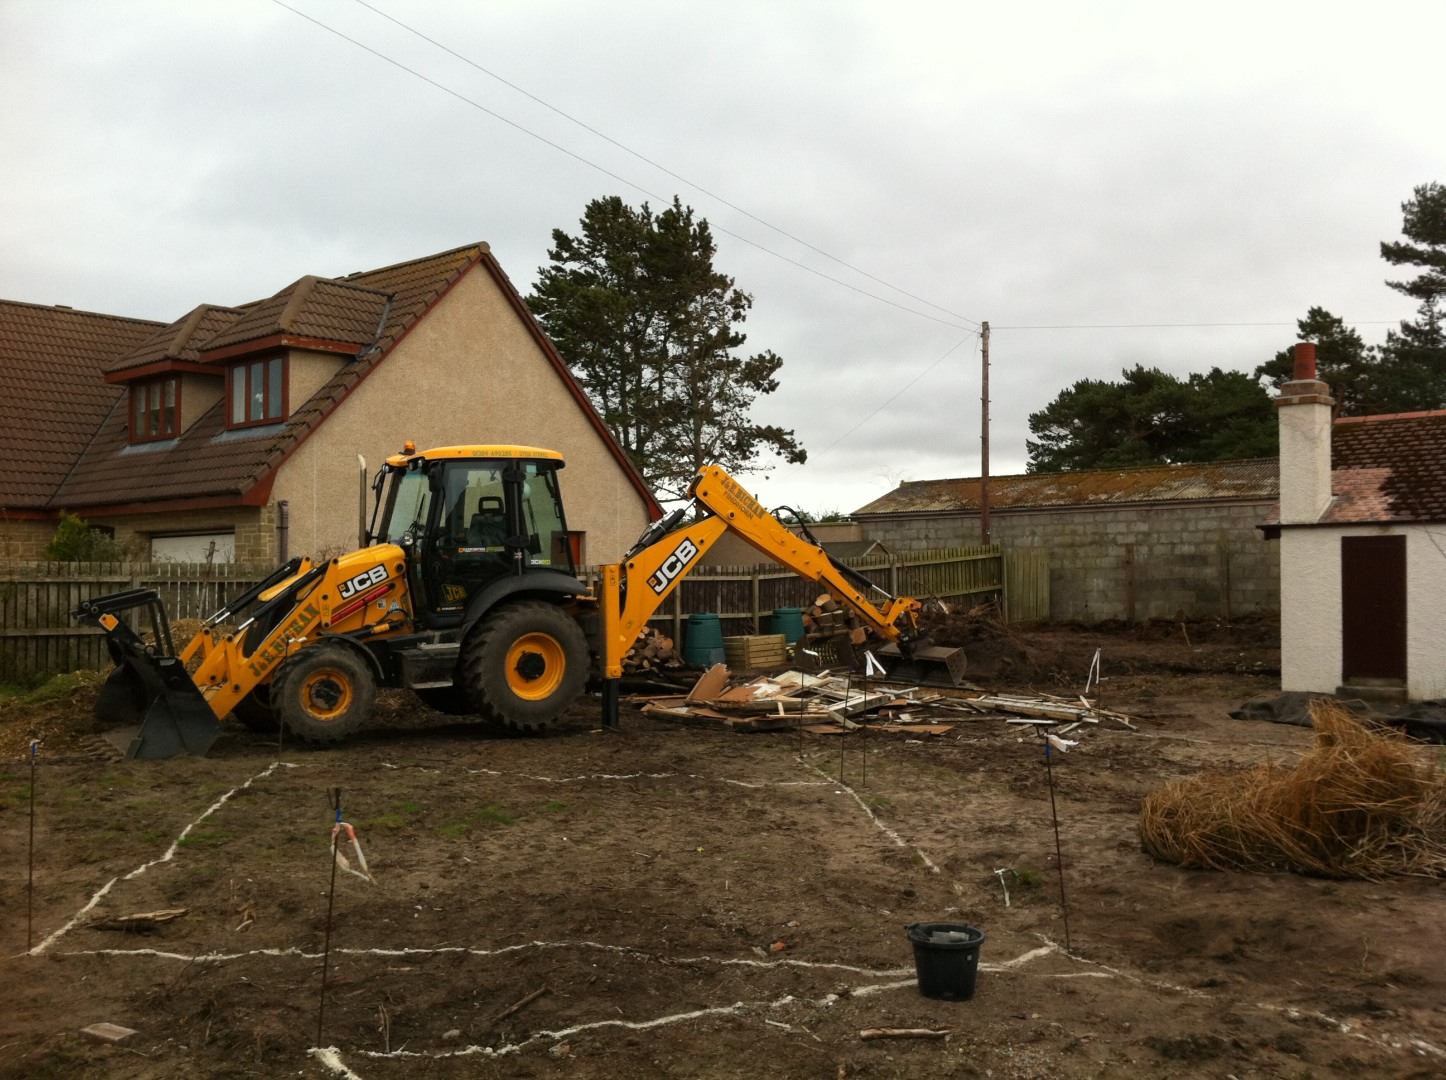 No more wendy house